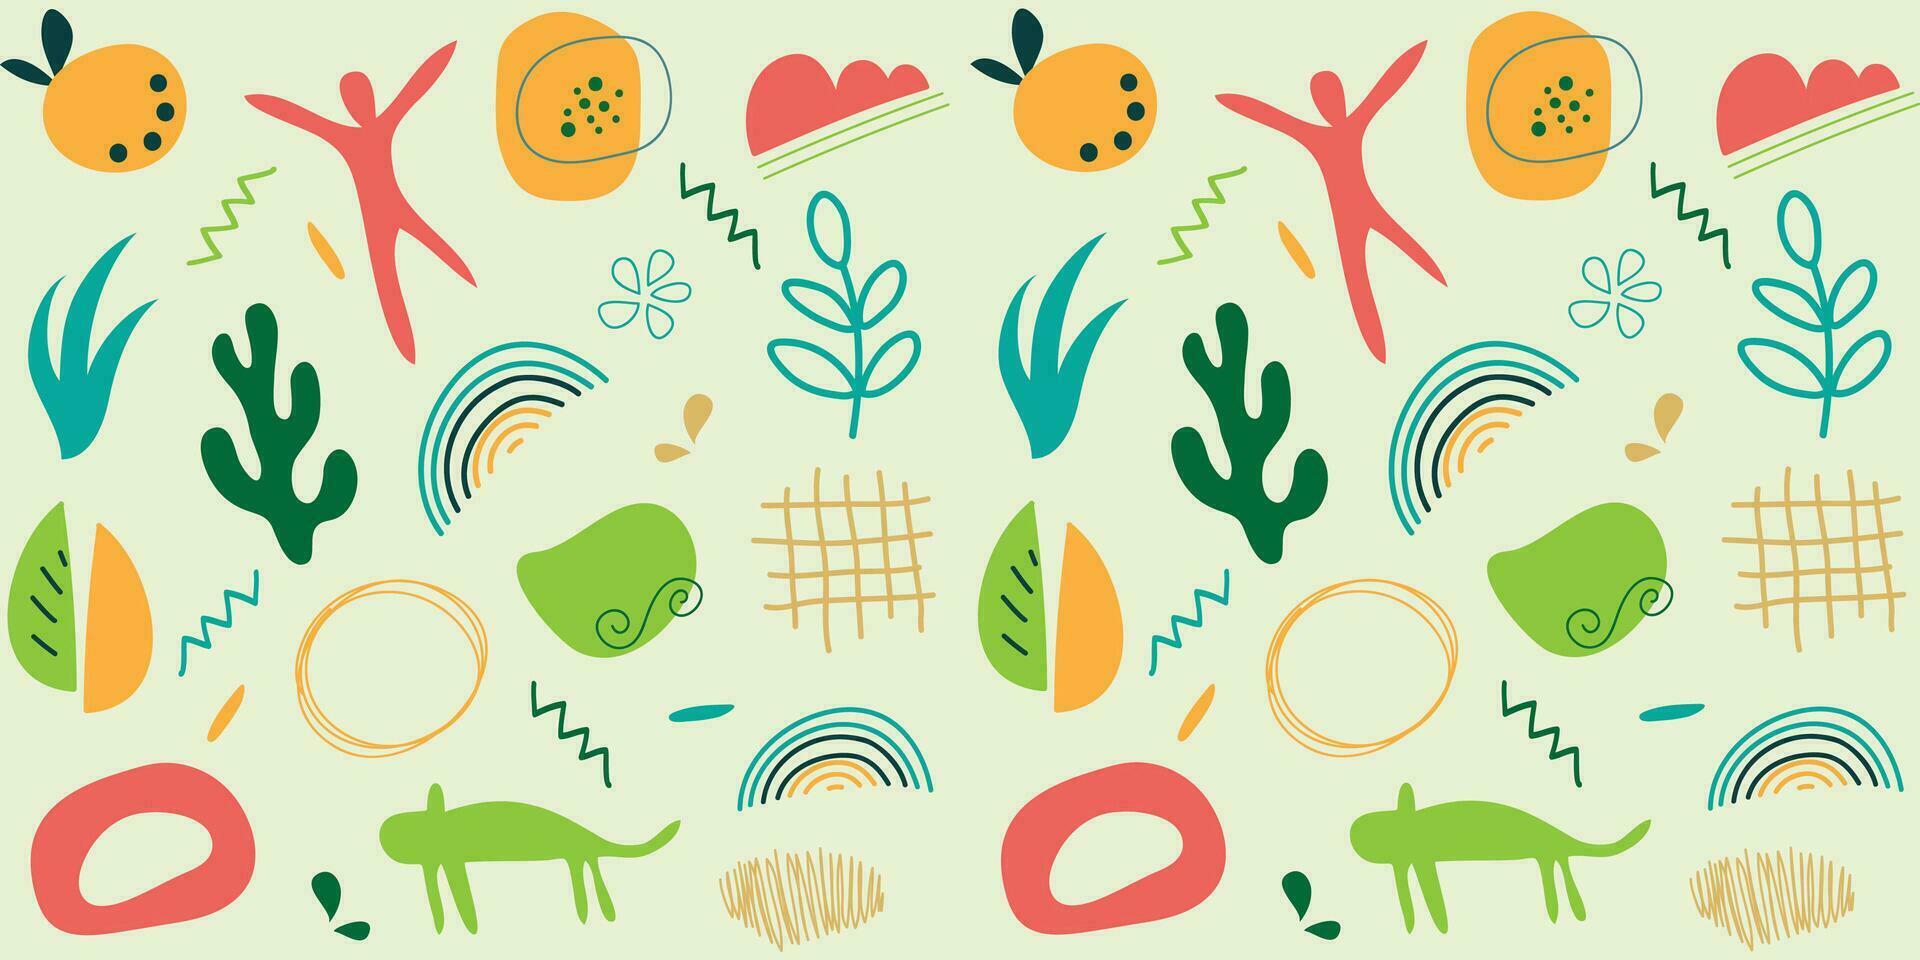 Set of trendy doodles and abstract nature icons on isolated white background. Big summer collection, unusual organic shapes in freehand matisse art style. Including vector